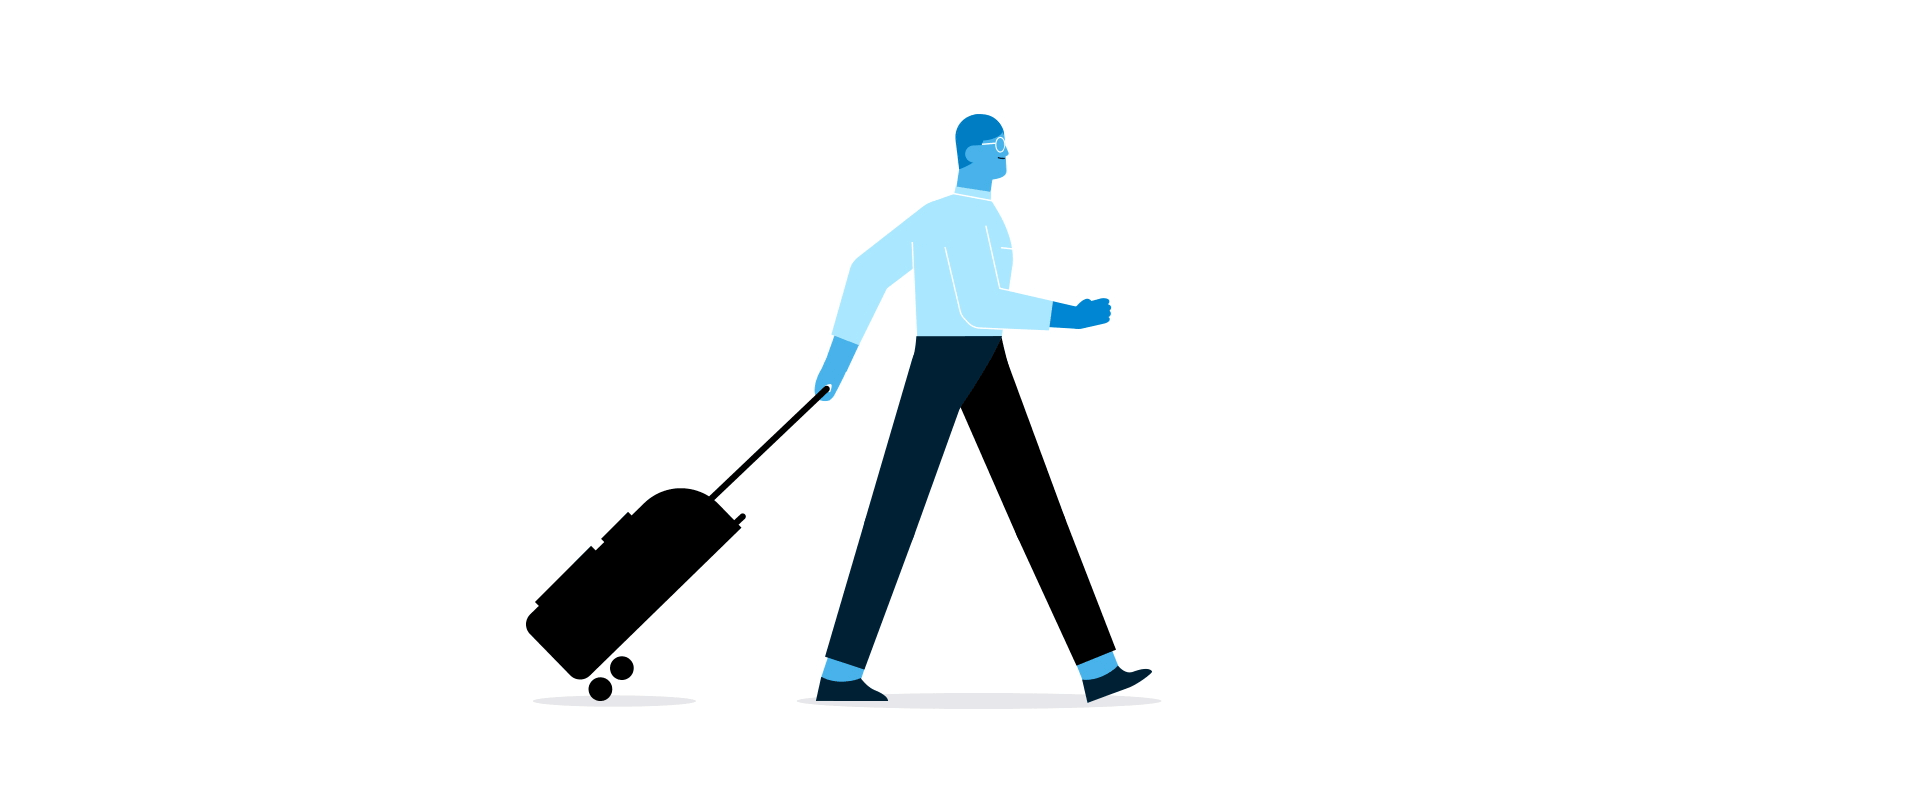 Looped animation of a walk-cycle with a man carrying a suitcase